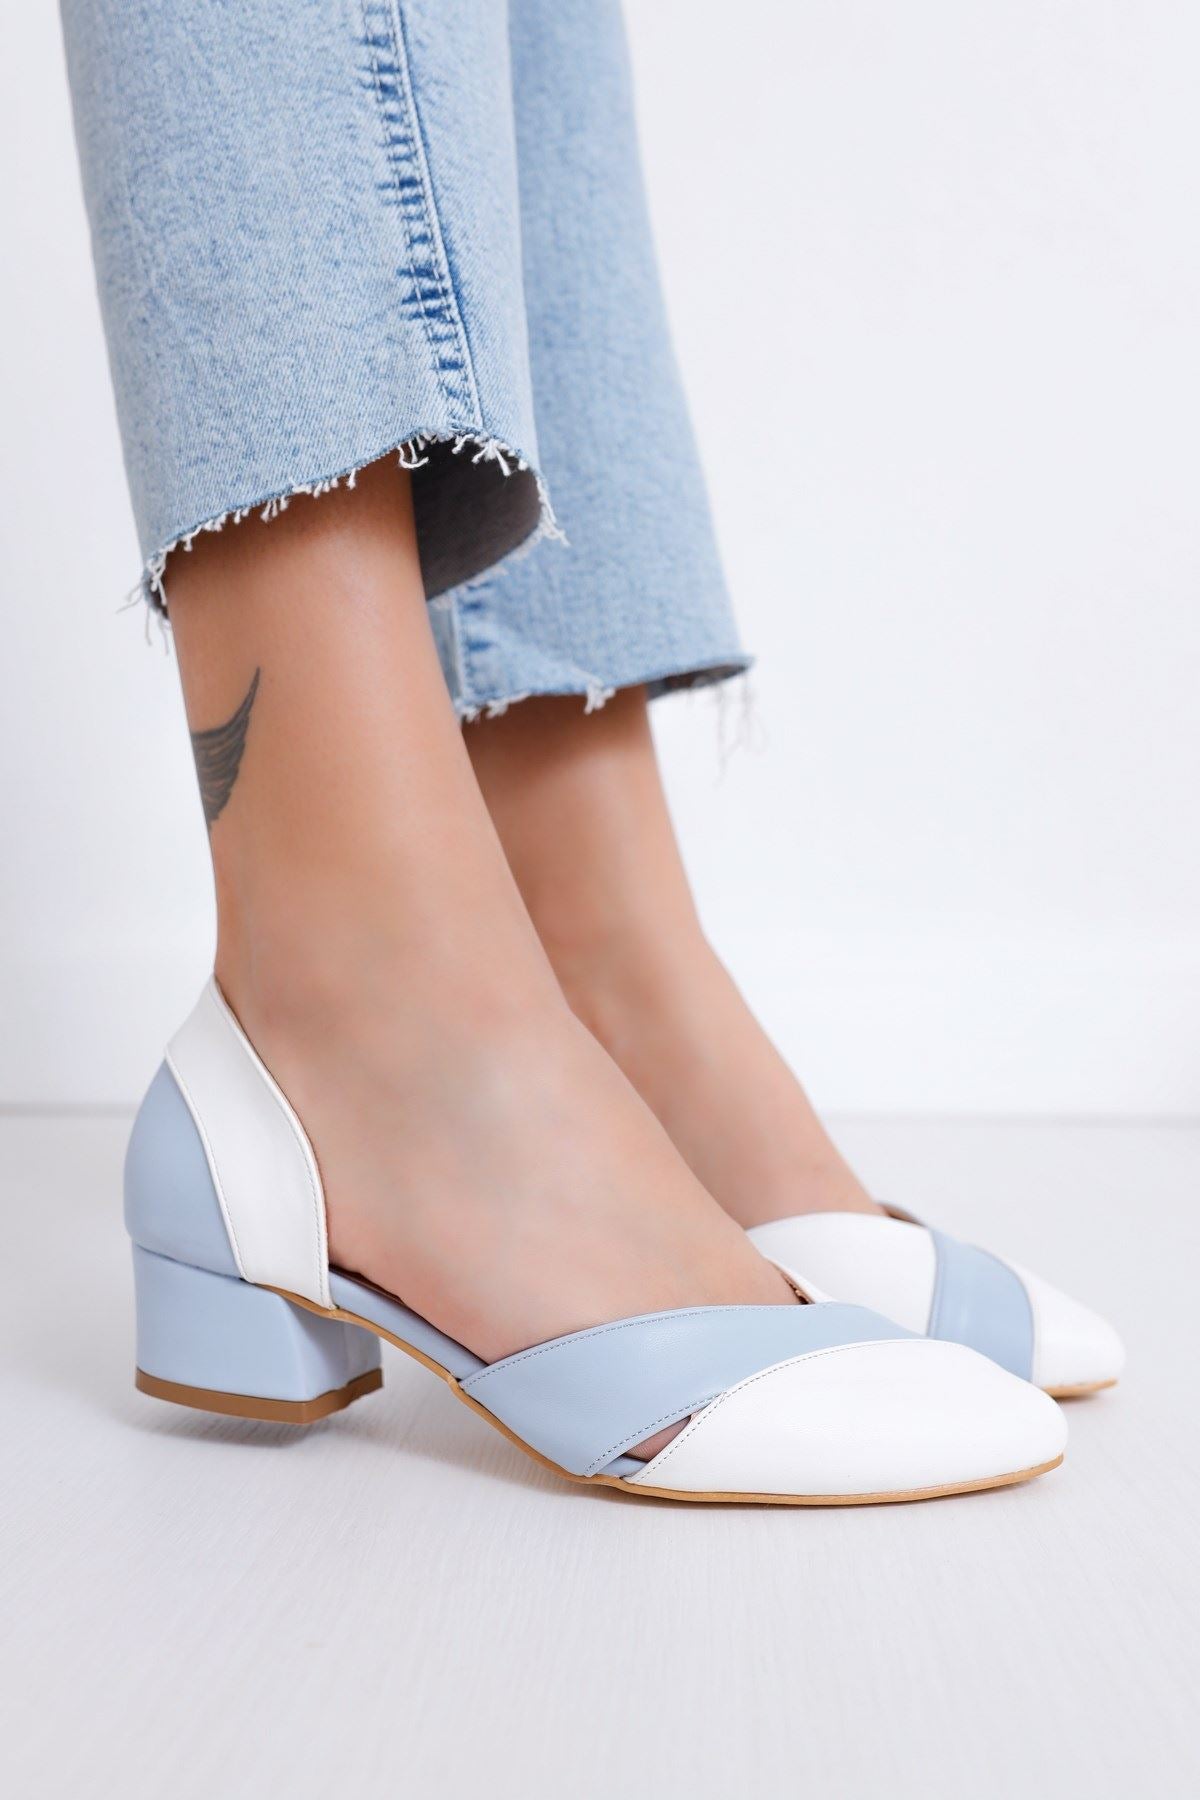 Women's Peggy Heels White-Baby Blue Skin Shoes - STREETMODE™